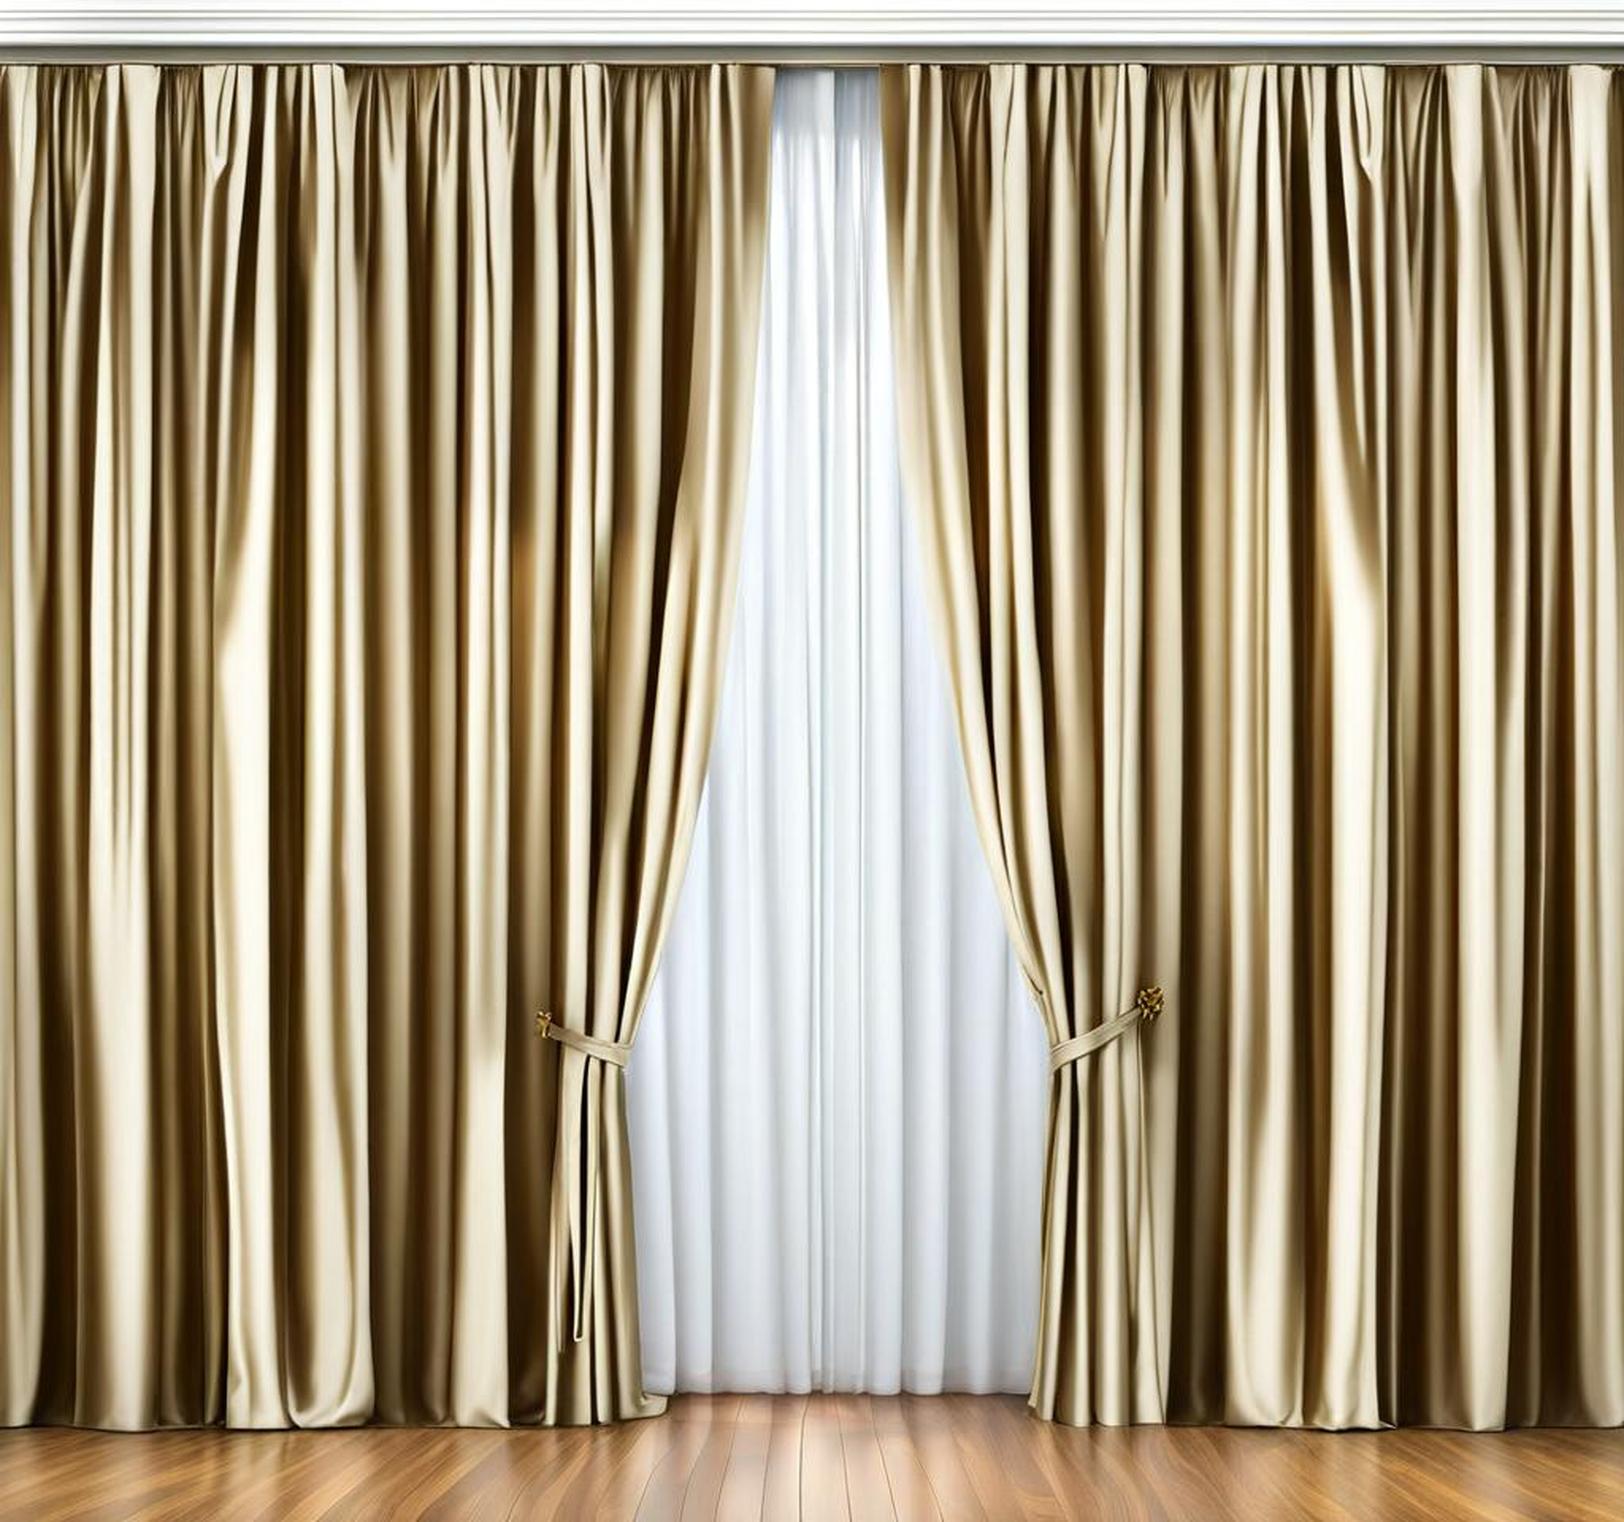 name different types of curtains